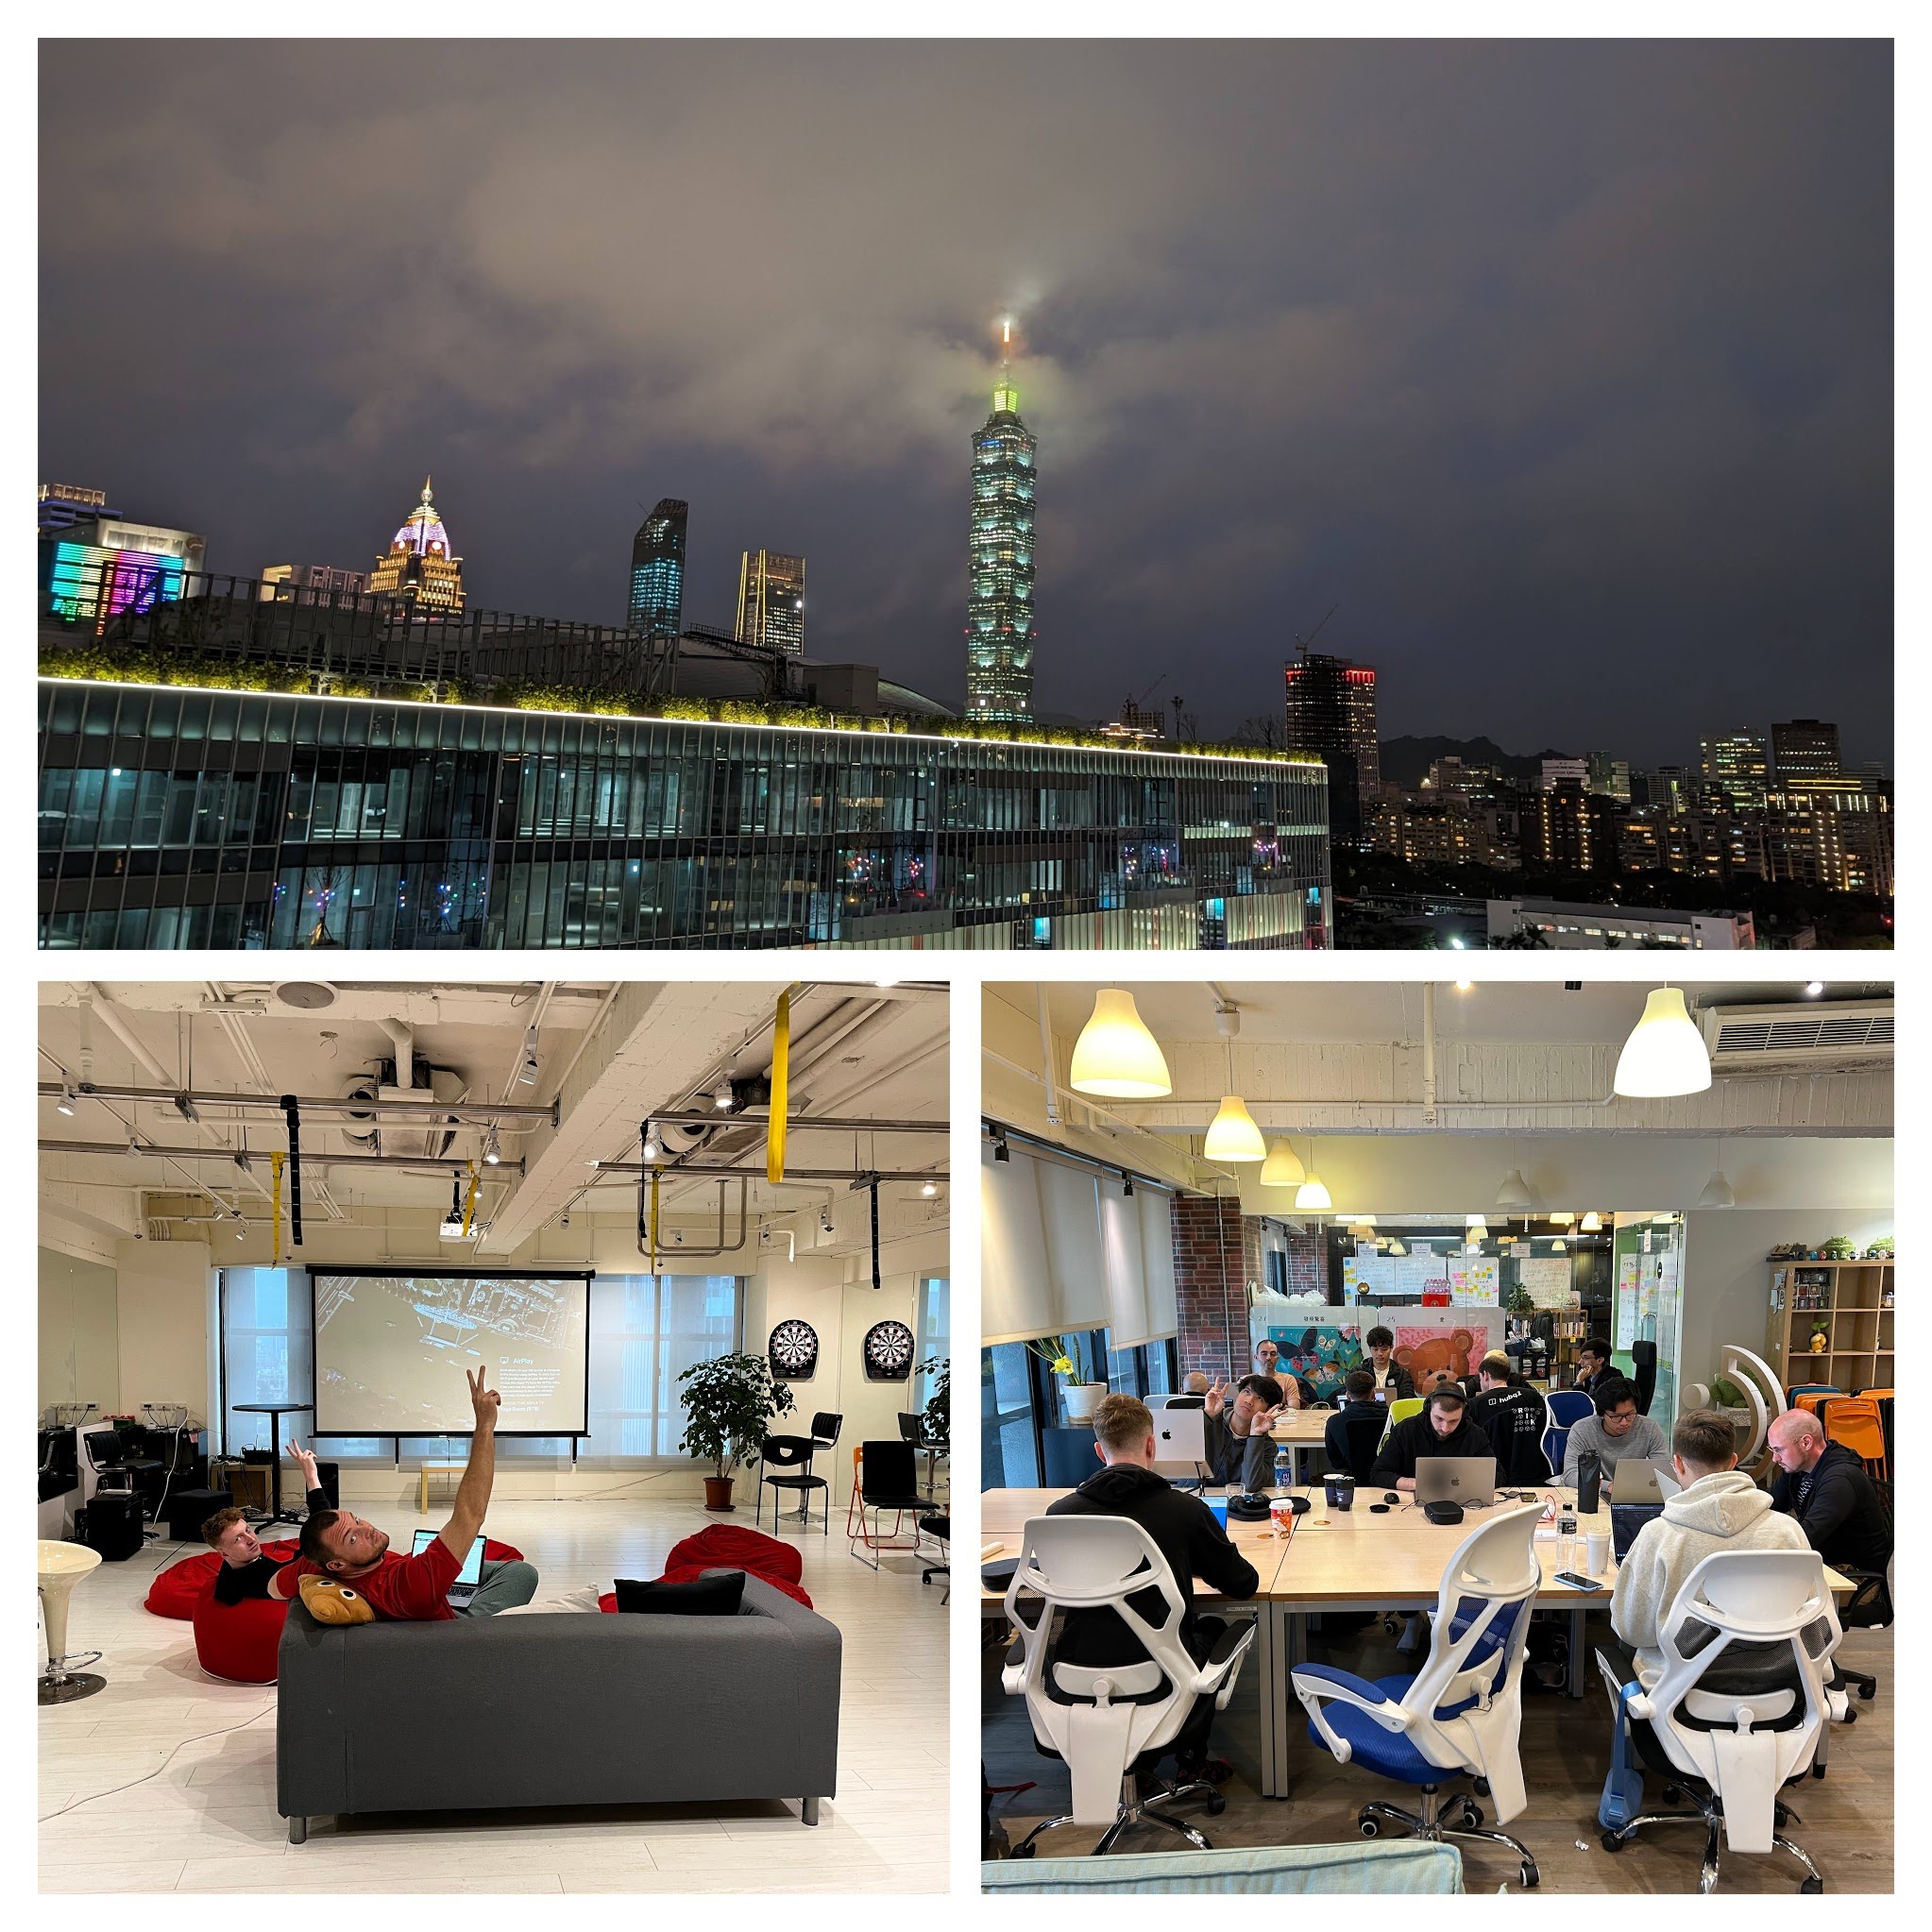 Working at the PicCollage Taipei Office